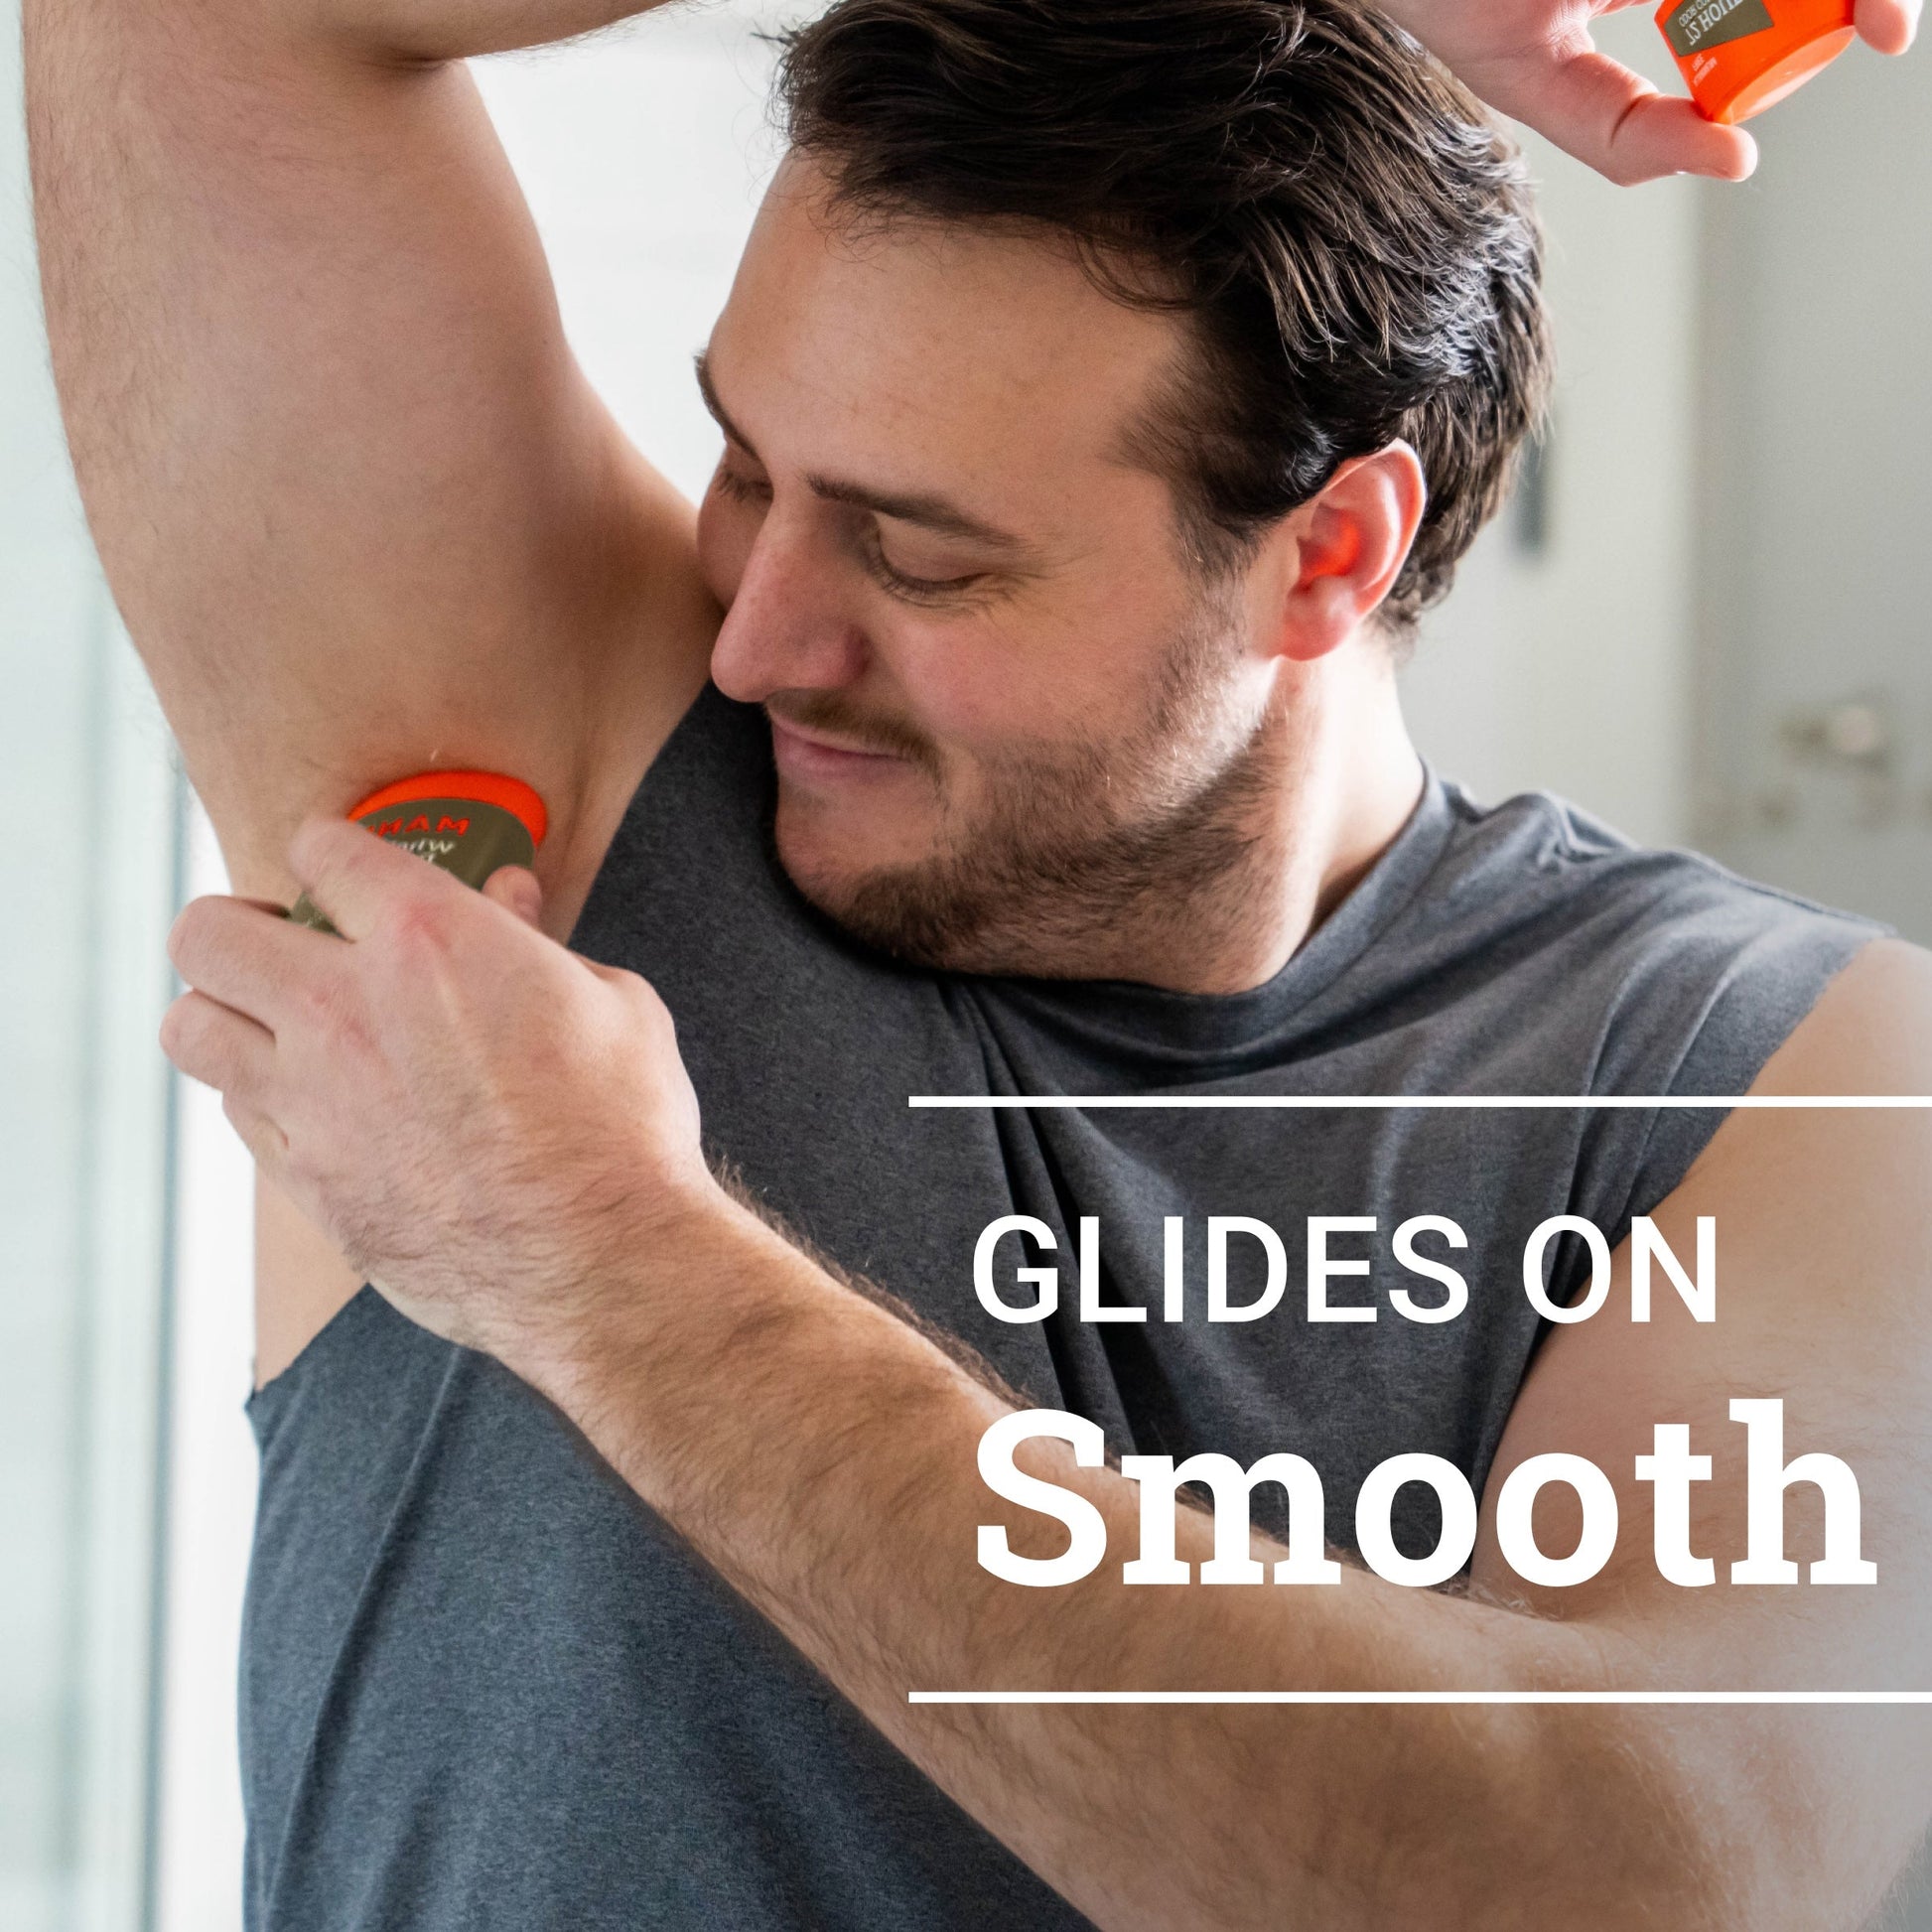 man smiling while applying unscented solid stick deodorant to armpit with text: glides on smooth